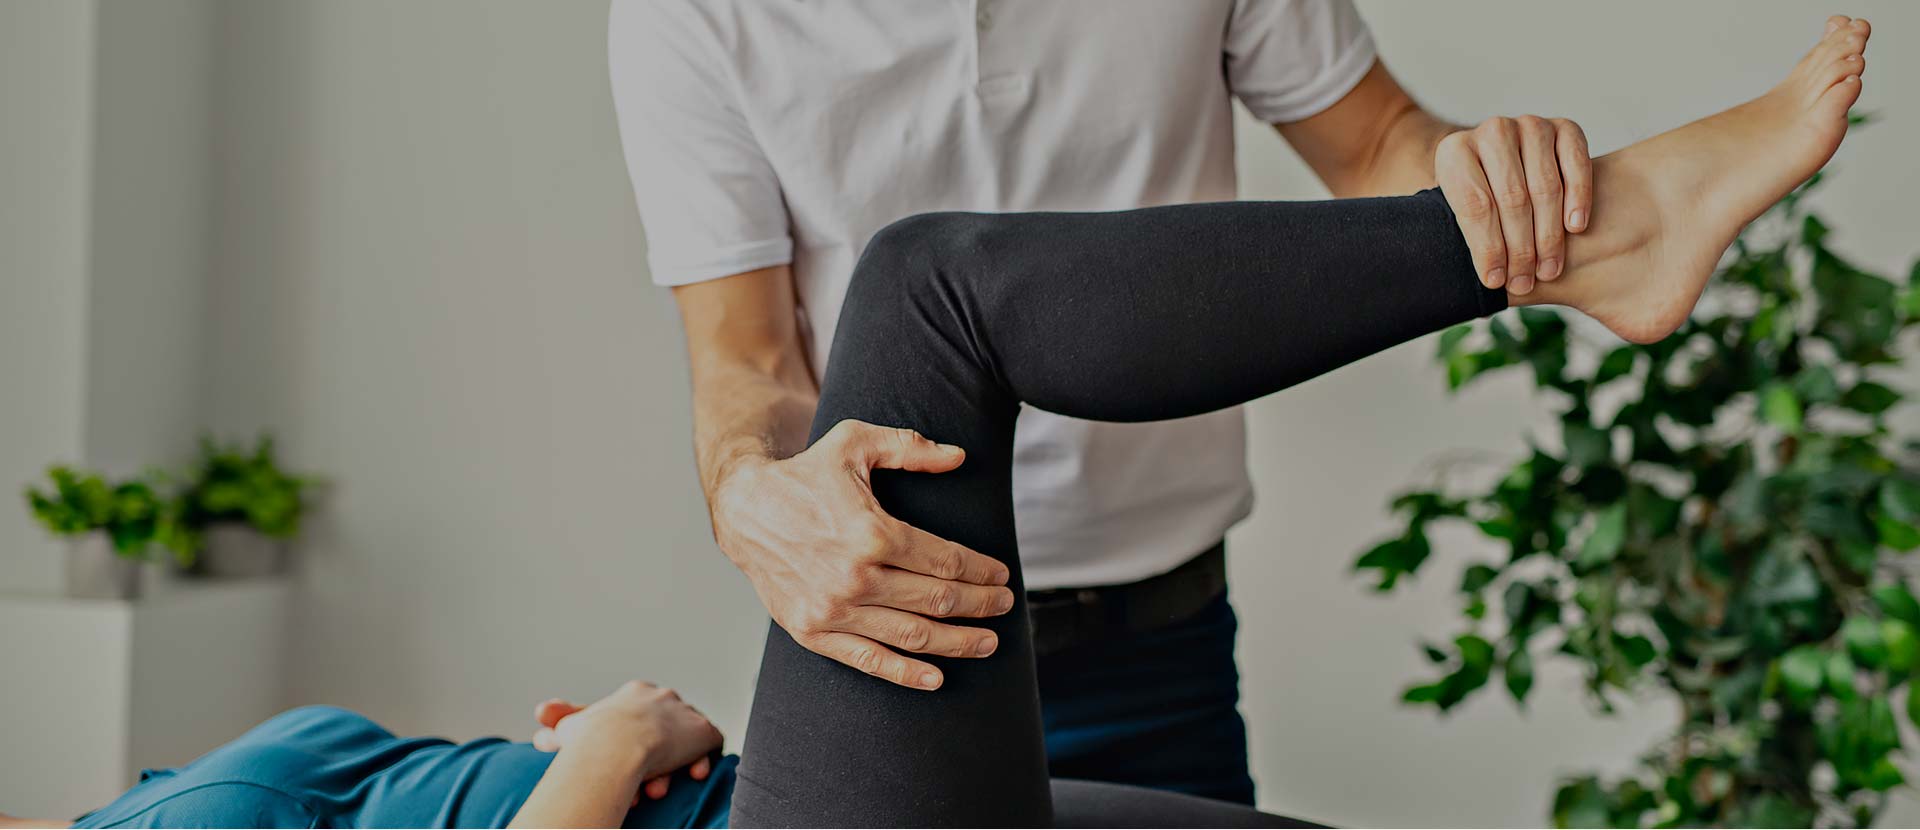 Physical therapy for leg knee and hip in the Indianapolis area from Milestone Physical Therapy & Training | Brad Howell, DPT | Indianapolis